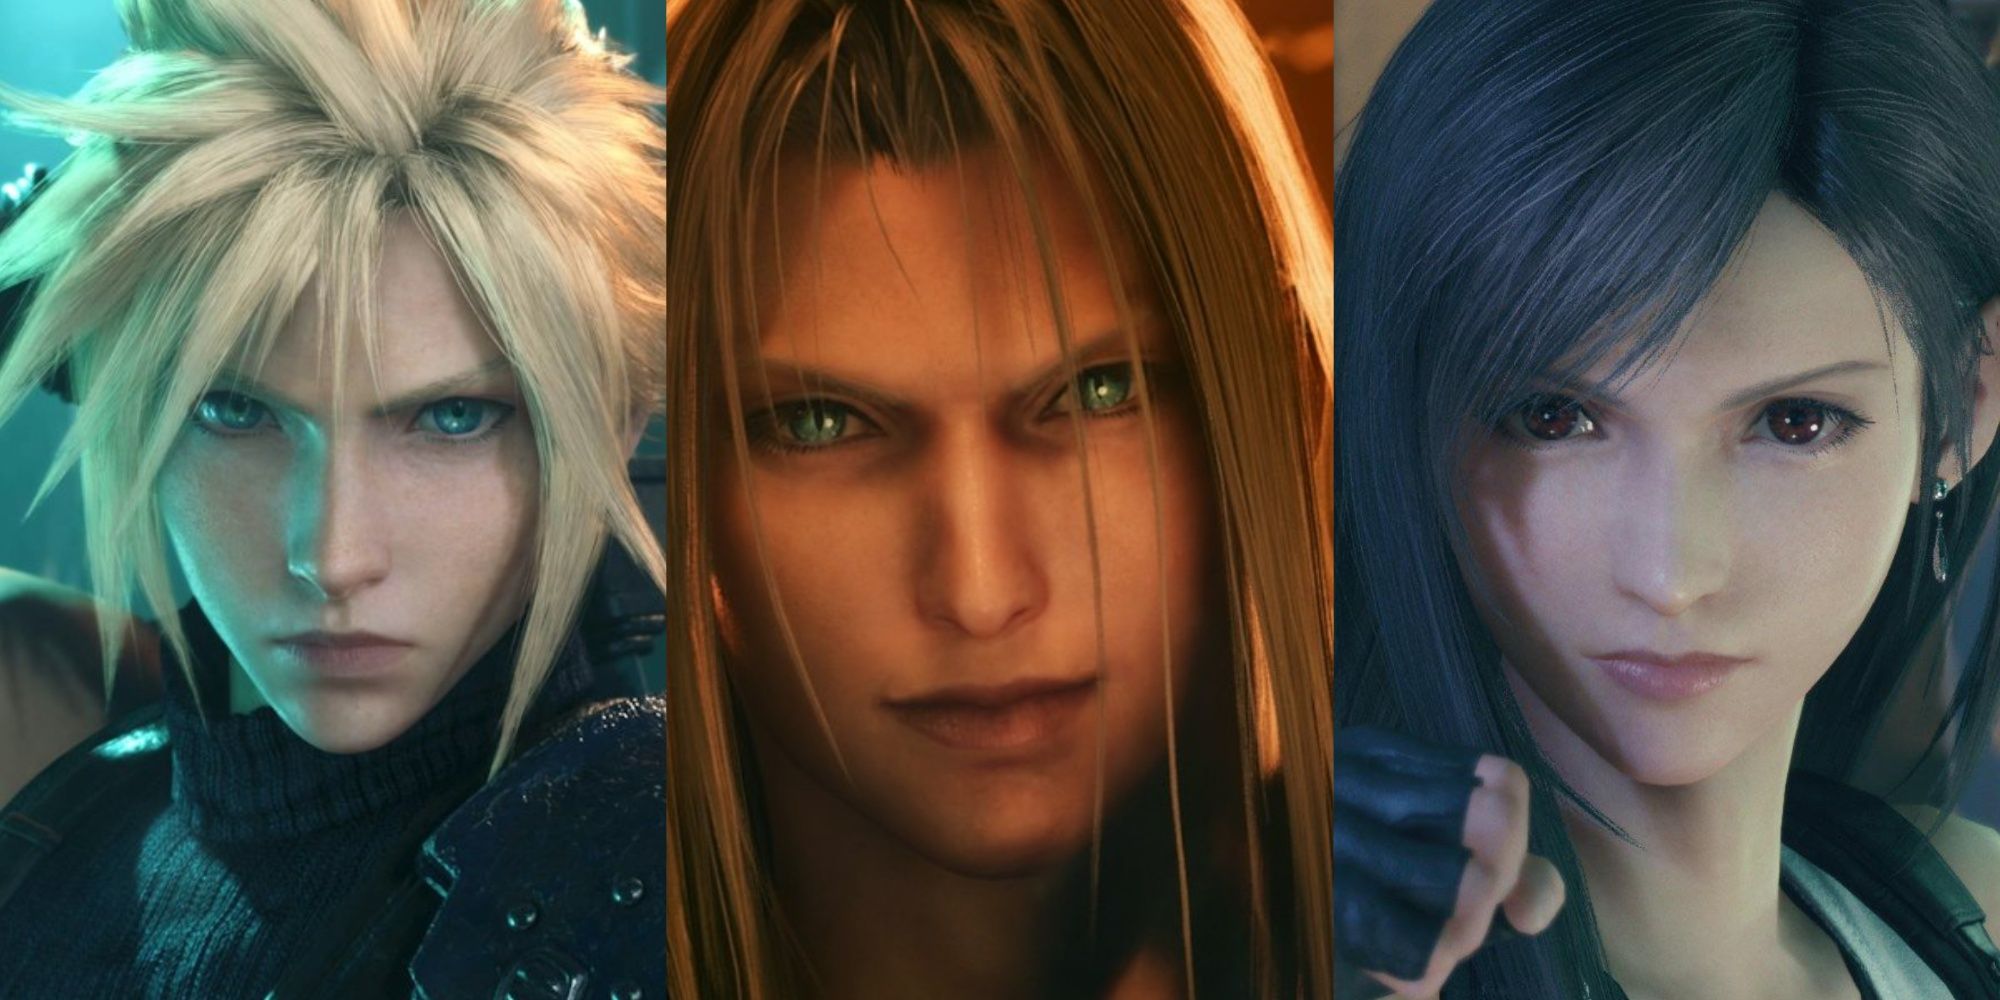 Featured Image featuring side by side images of Cloud, Sephiroth and Tifa